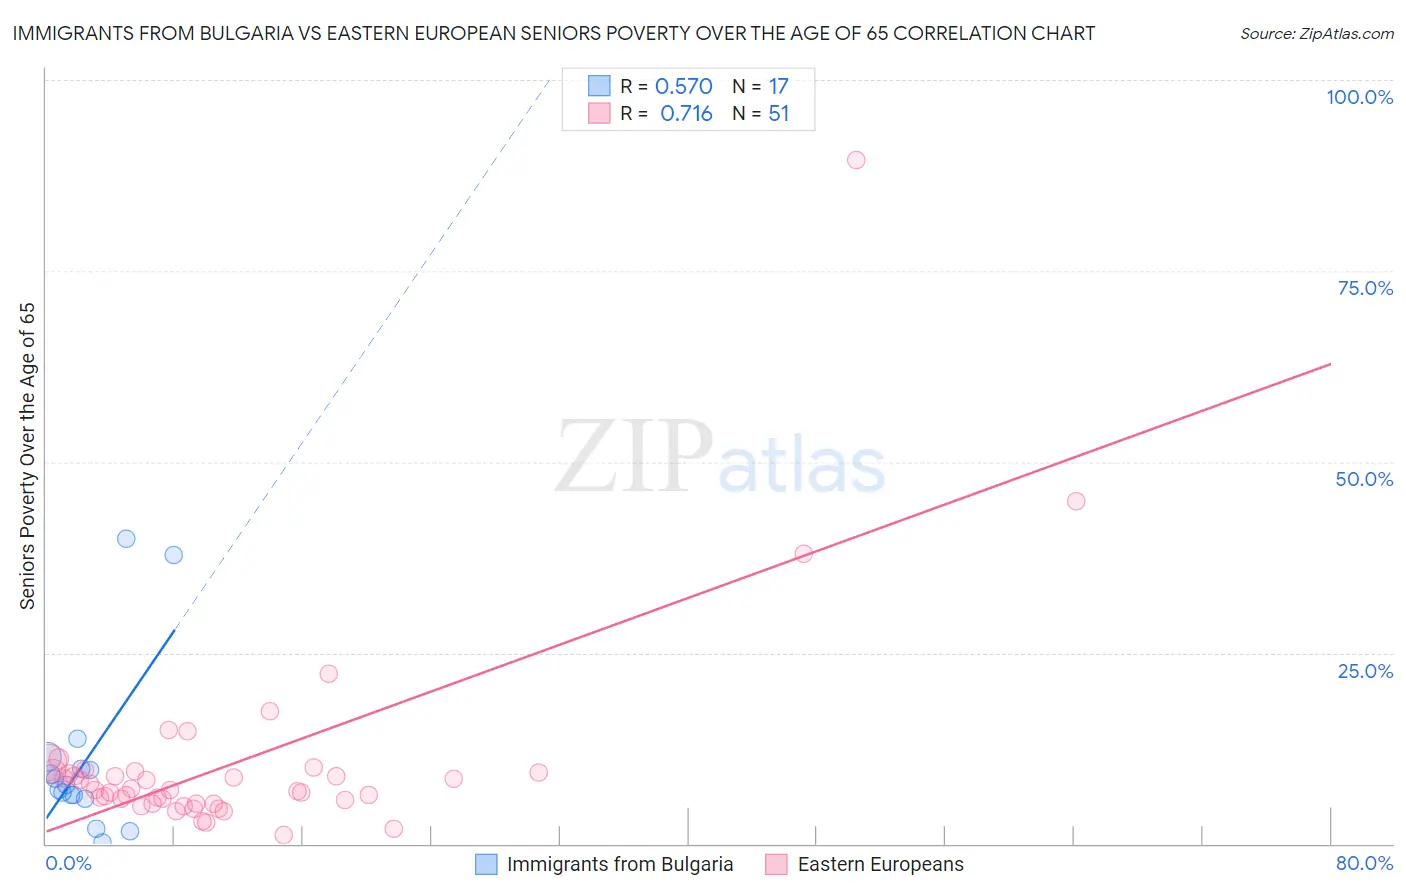 Immigrants from Bulgaria vs Eastern European Seniors Poverty Over the Age of 65